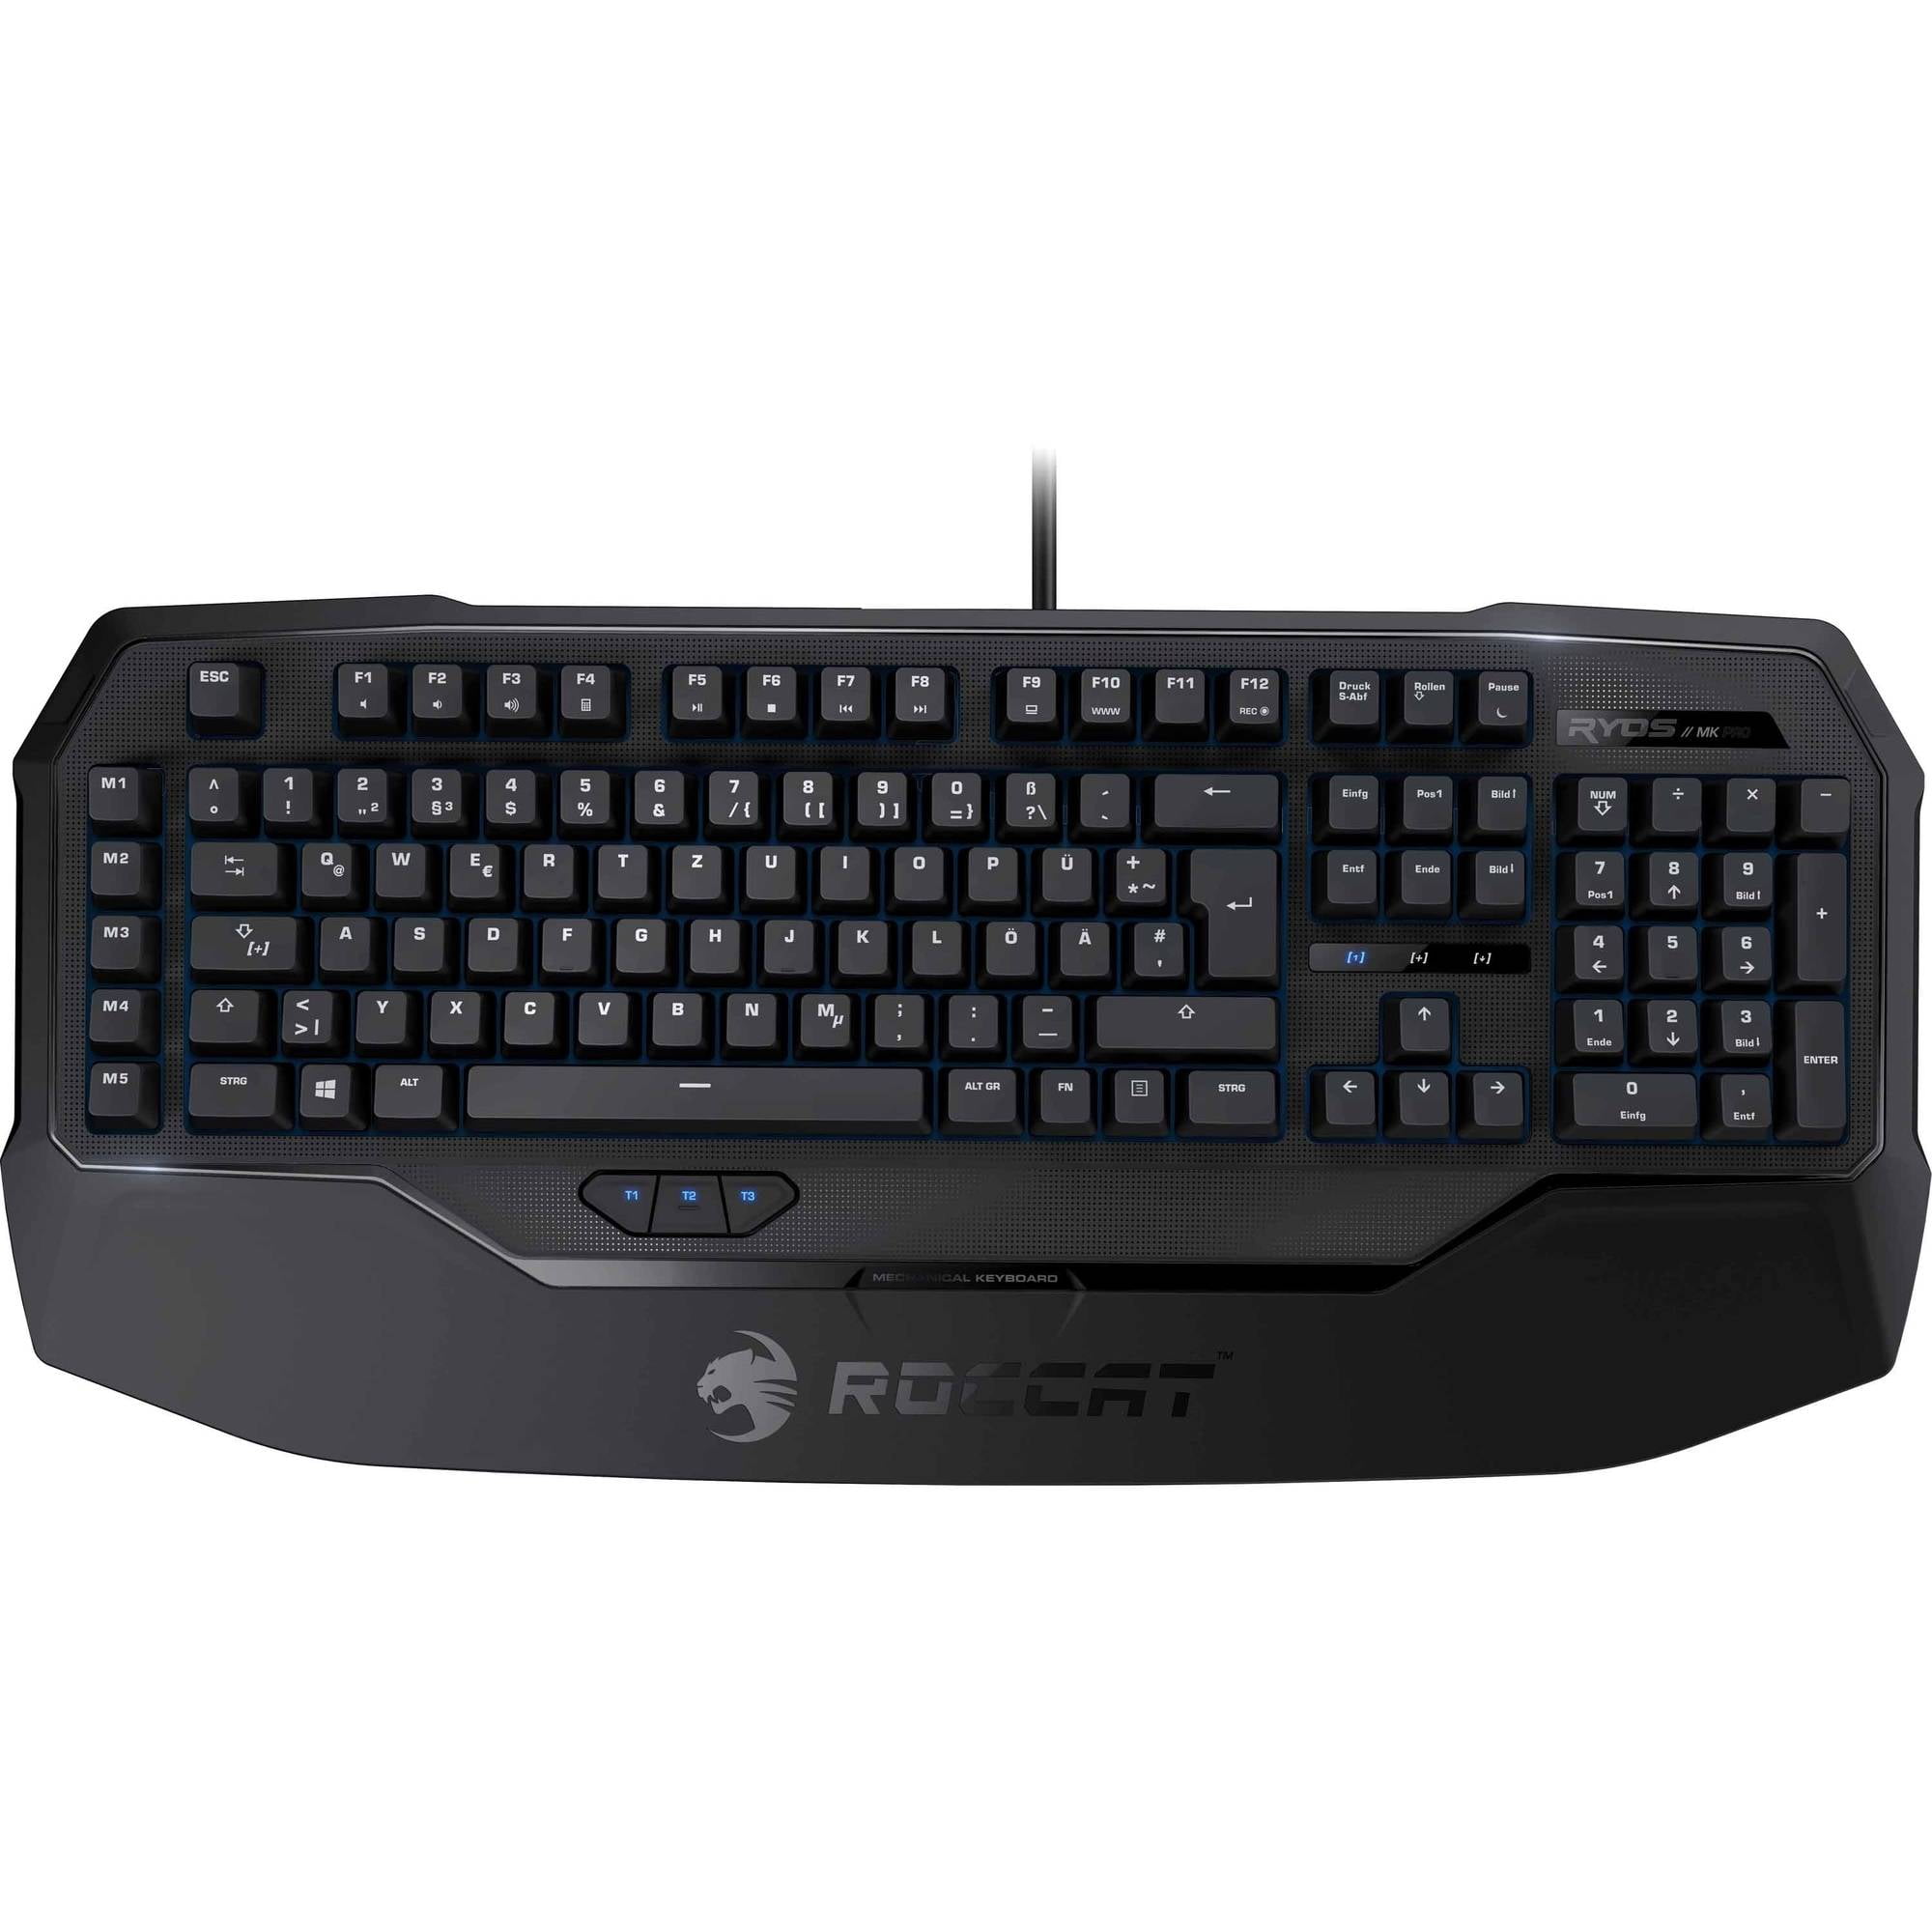 Switch MX Gaming Mechanical Keyboard Ryos MK with and Advanced ROCCAT Key Cherry